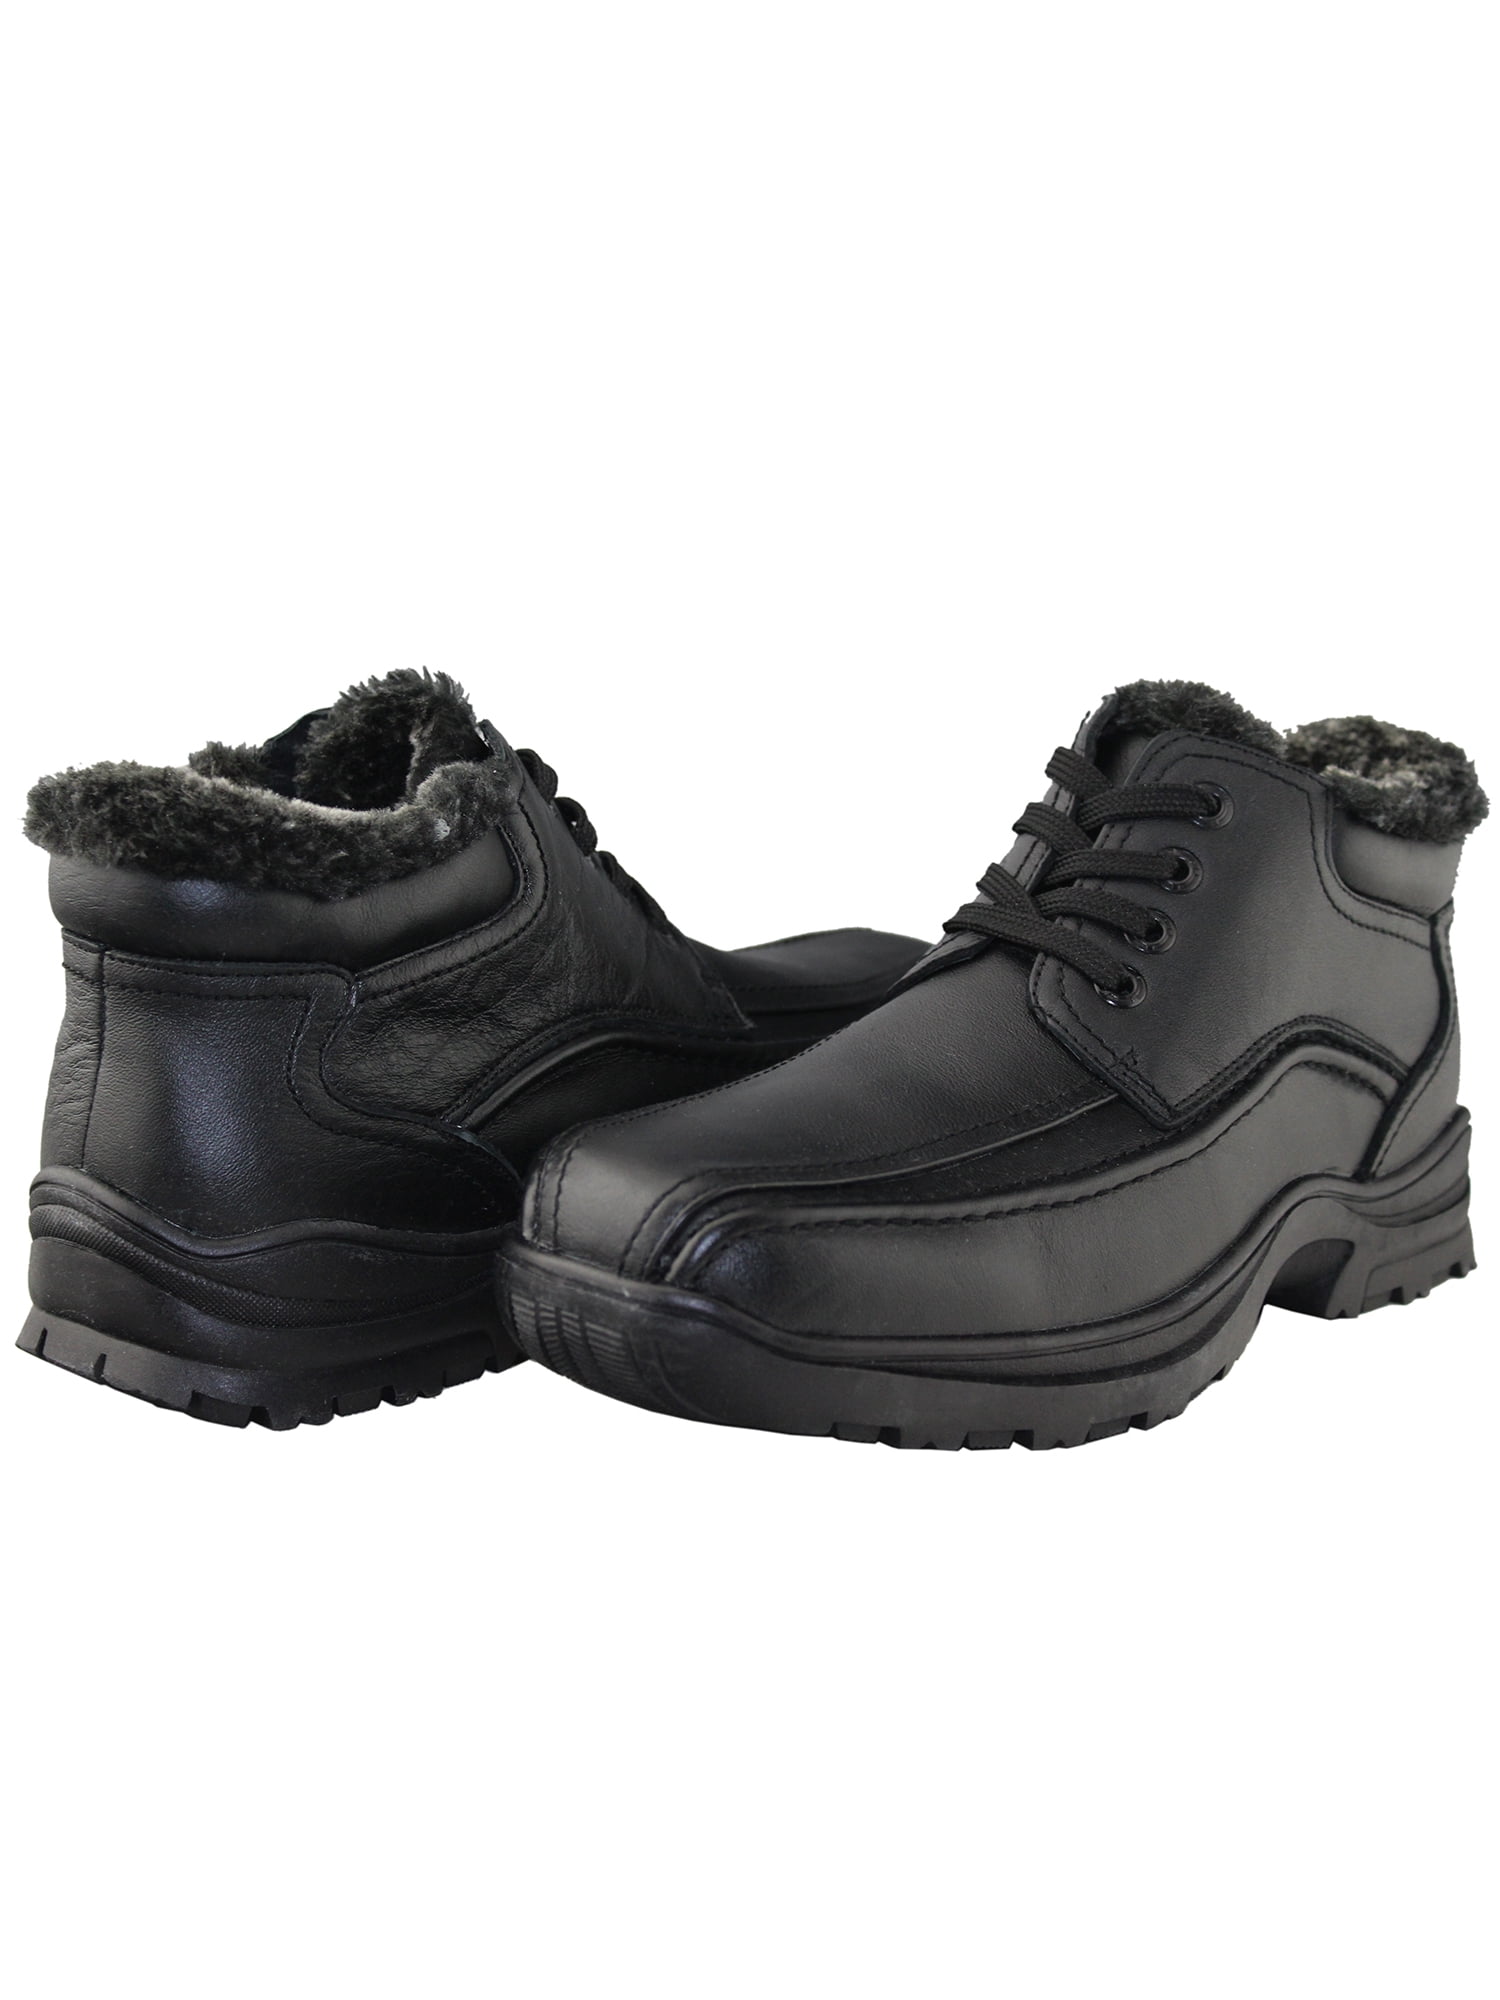 Tanleewa Mens Ankle Winter Boots Comfy 